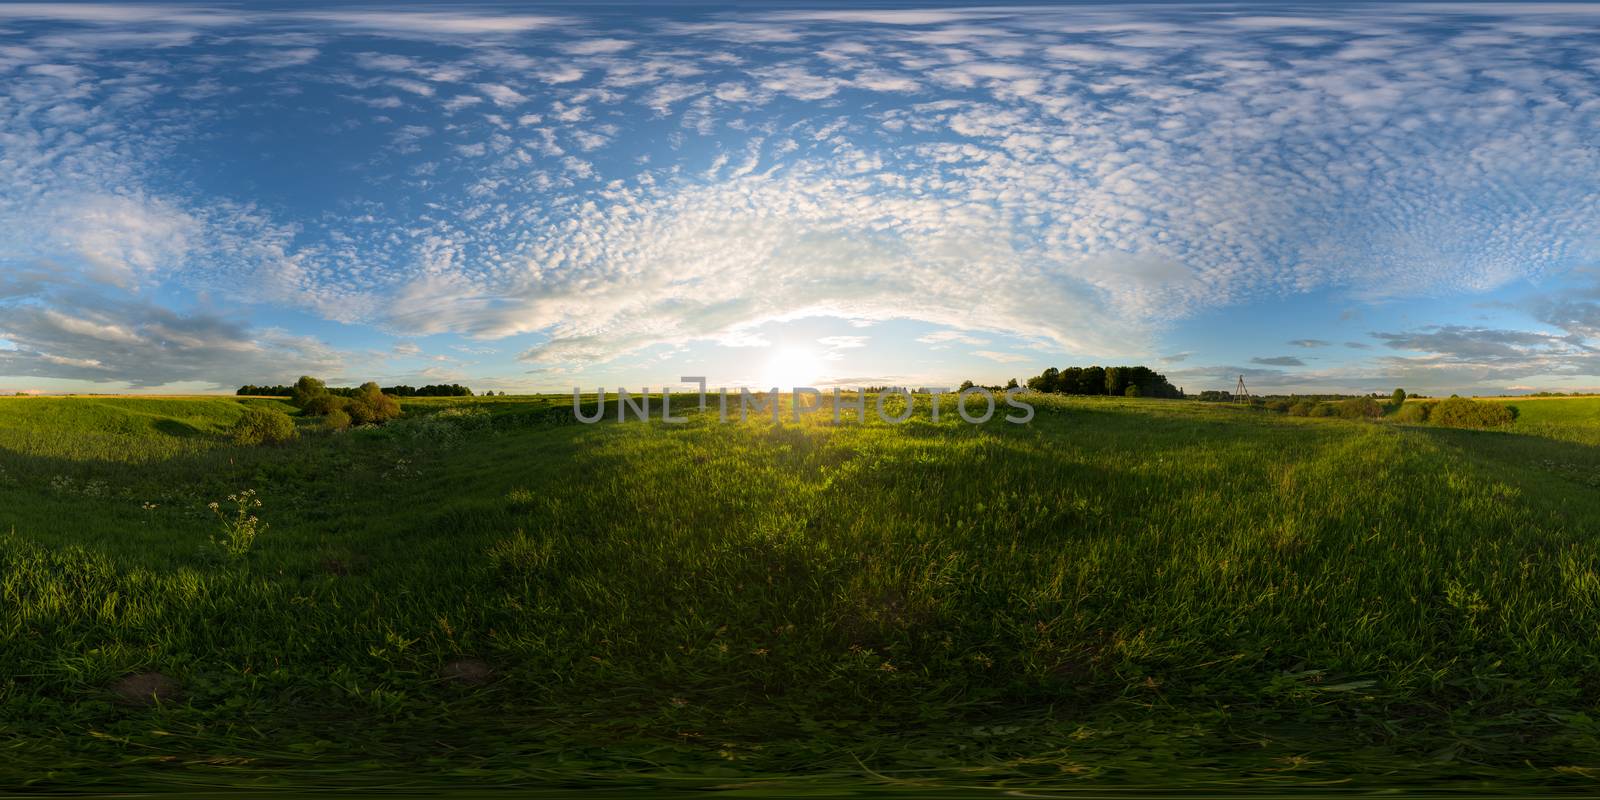 Sunset on meadow full spherical panorama. 360 by 180 degree angle of view in equirectangular projection. May be used in virtual reality or 3D-graphics content as photorealistic background.